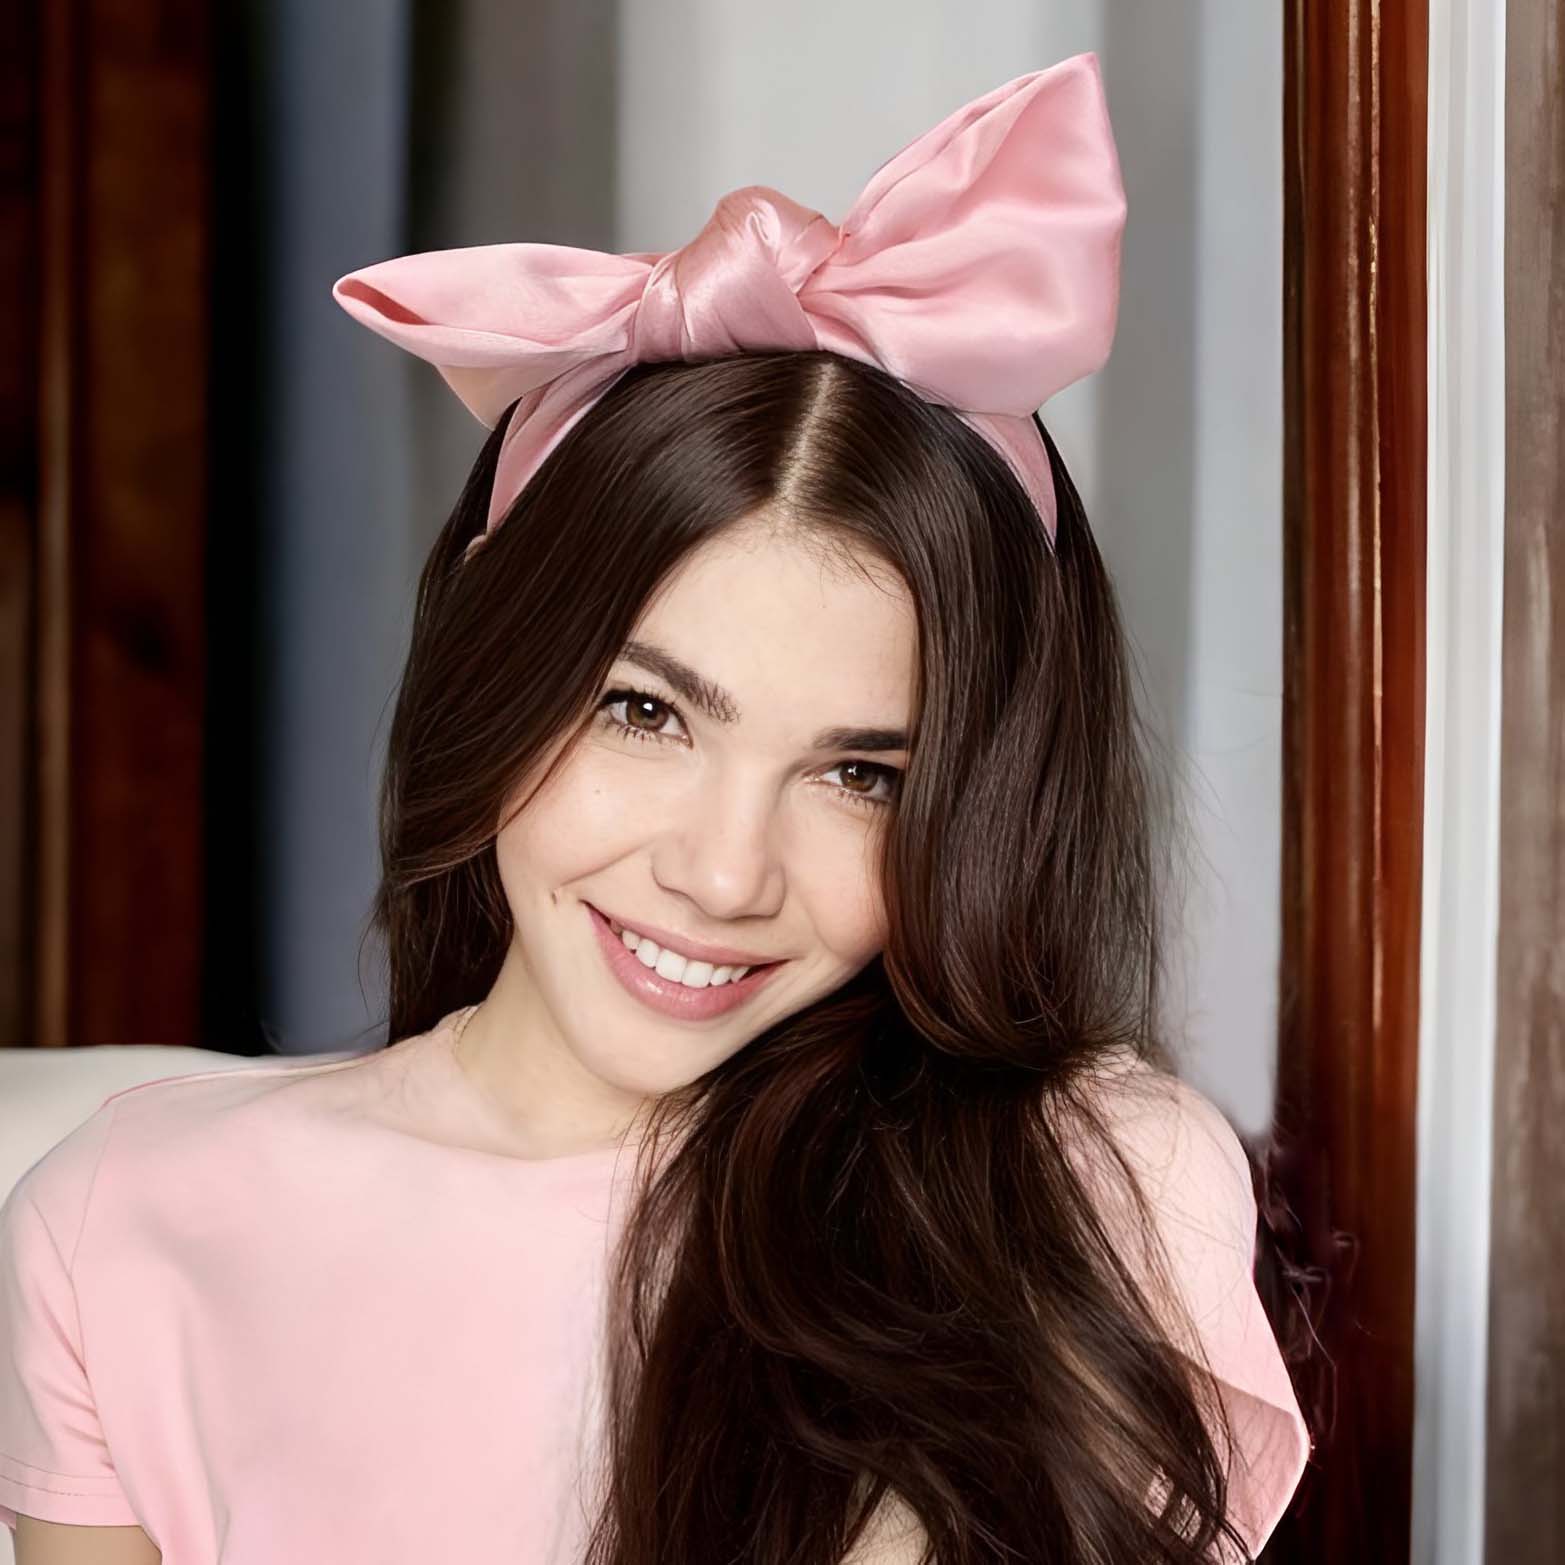 nevermindyrhead Bow Headband for Women Non Slip Fashion Knotted Girls Bunny Ears Hair Accessories